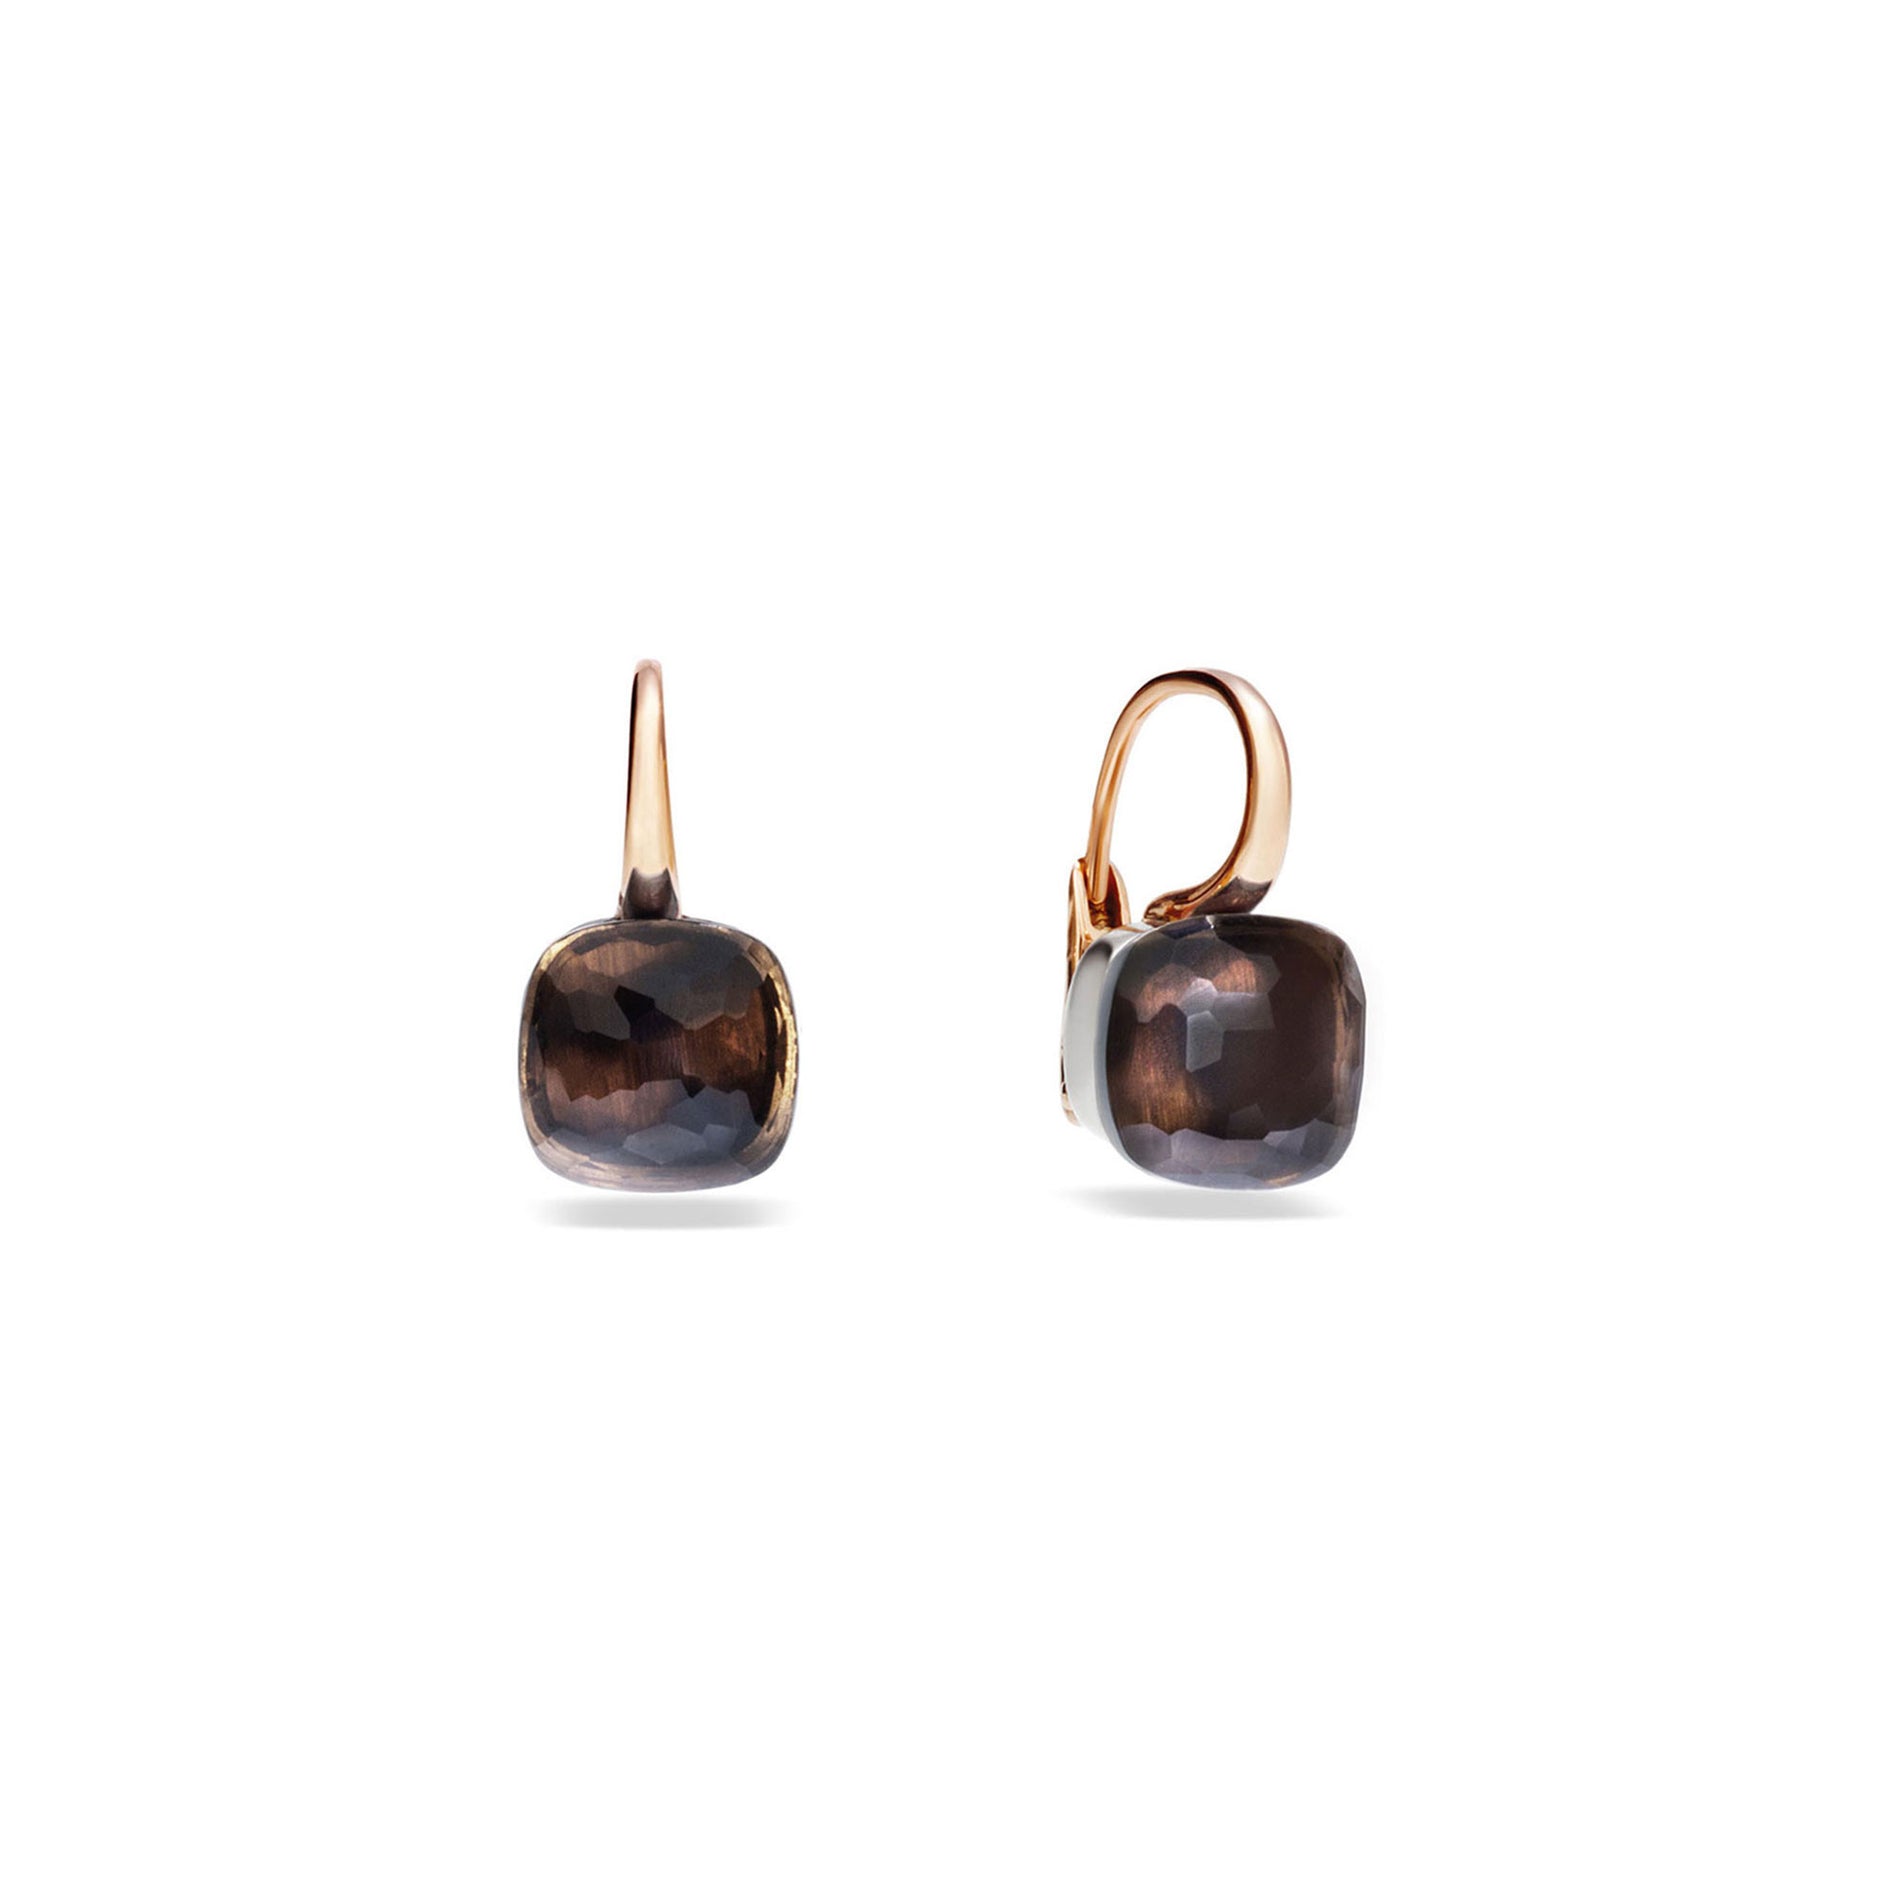 Nudo Classic Earrings in 18k Rose and White Gold with Smoky Quartz - Orsini Jewellers NZ